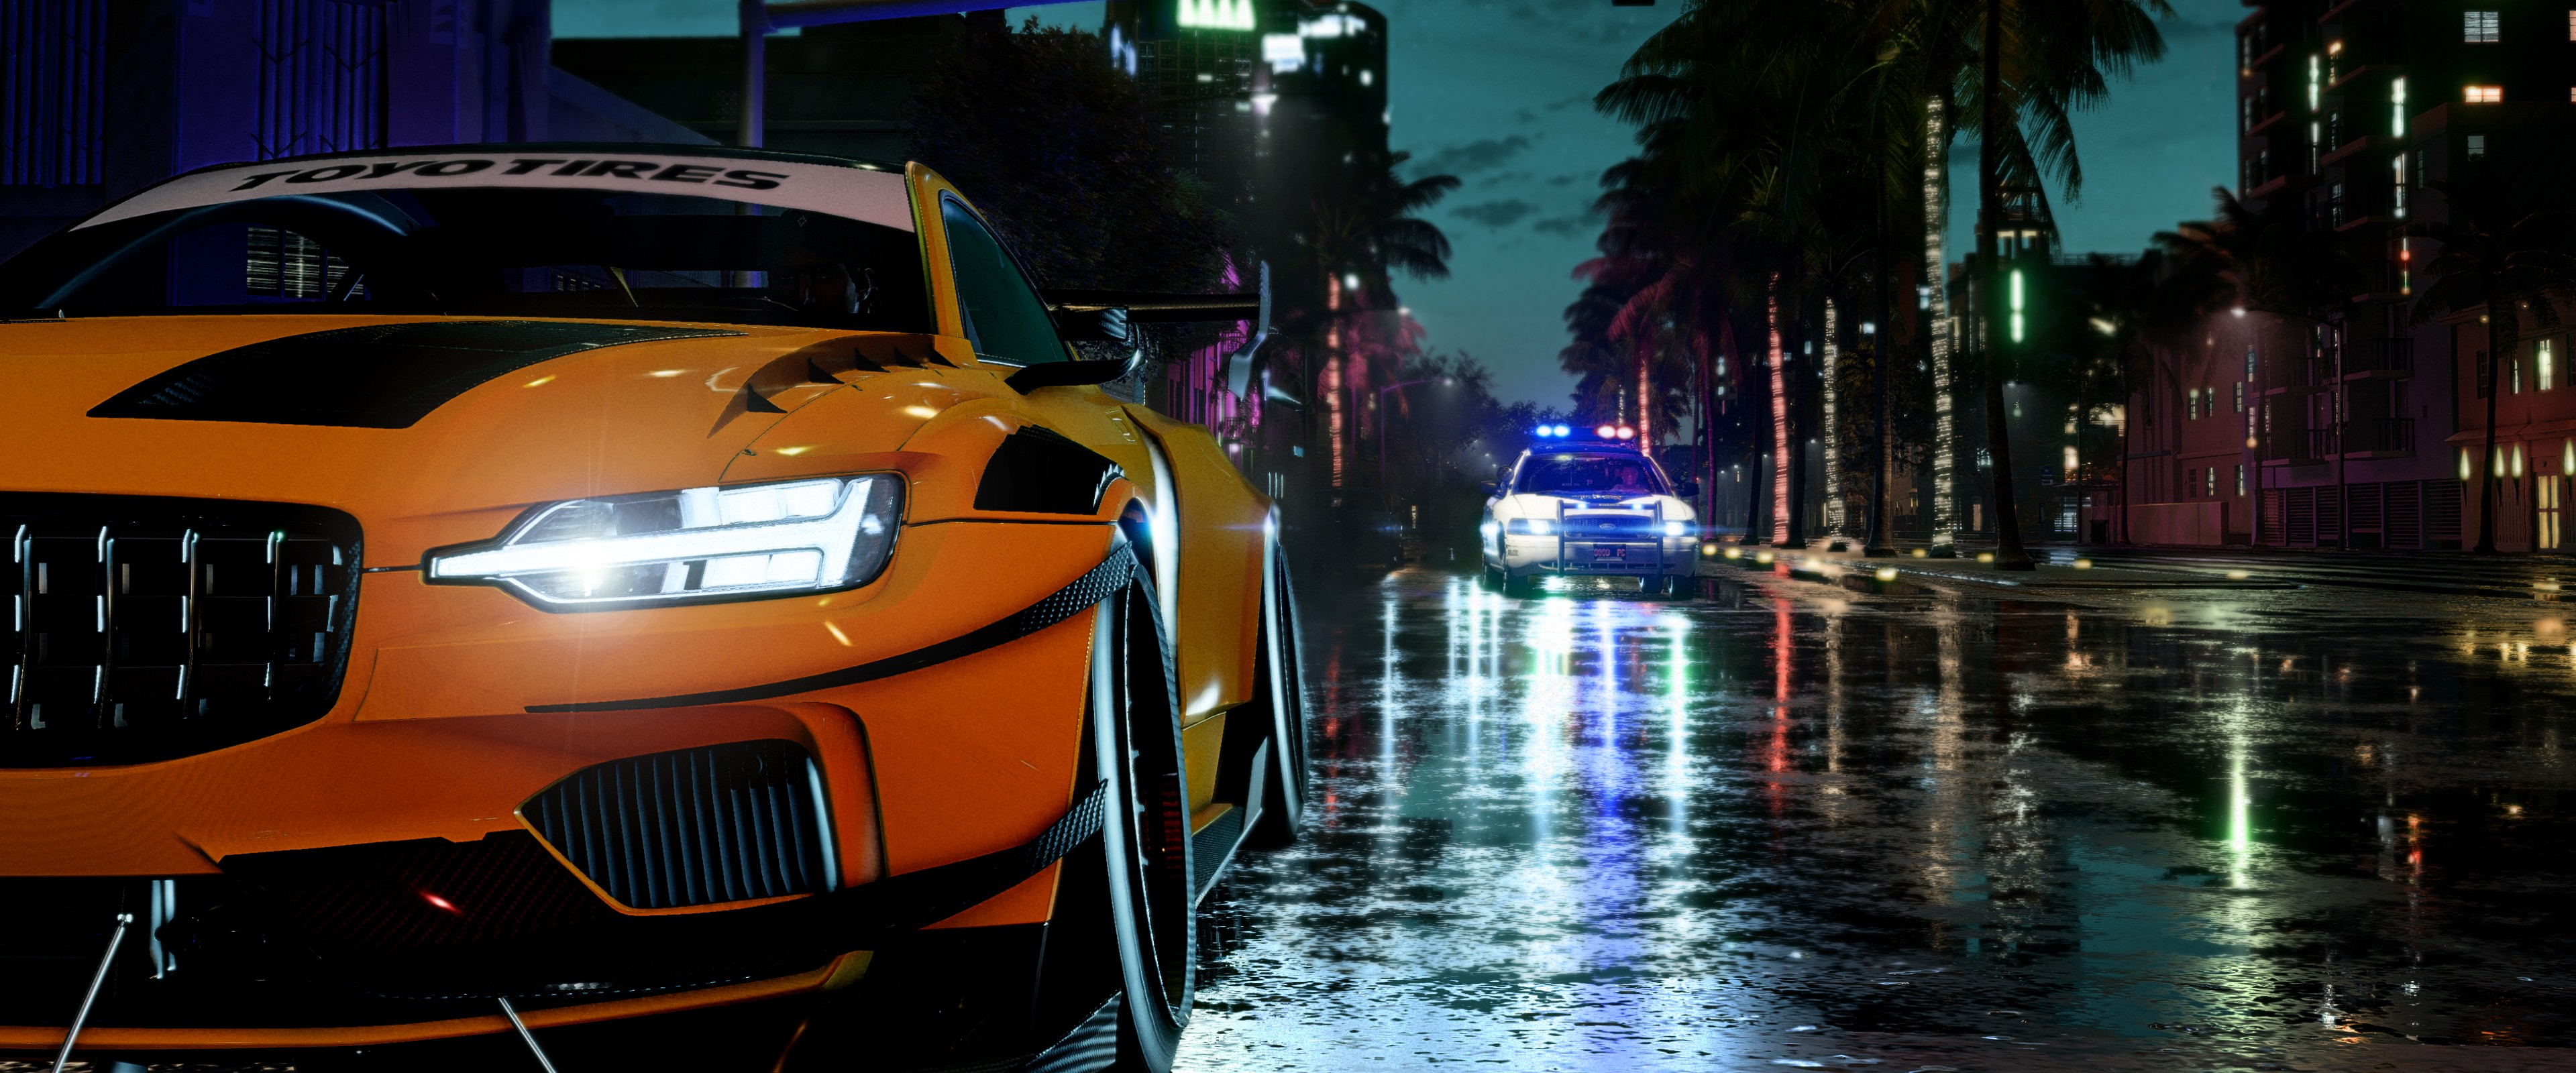 need for speed heat free download windows 10